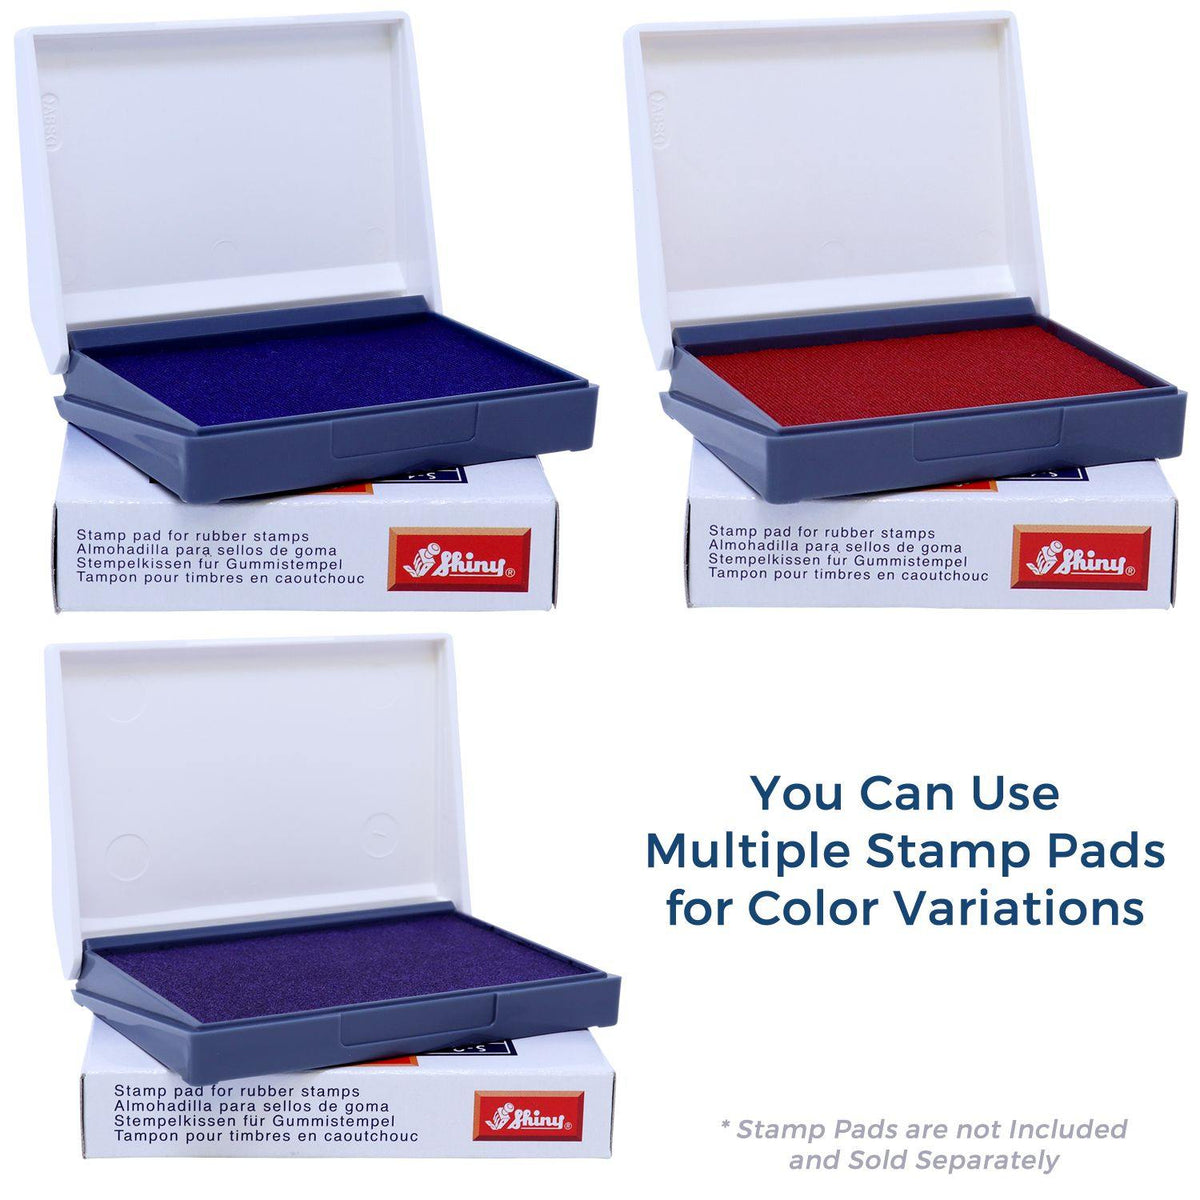 Stamp Pads for Duplicate Rubber Stamp Available